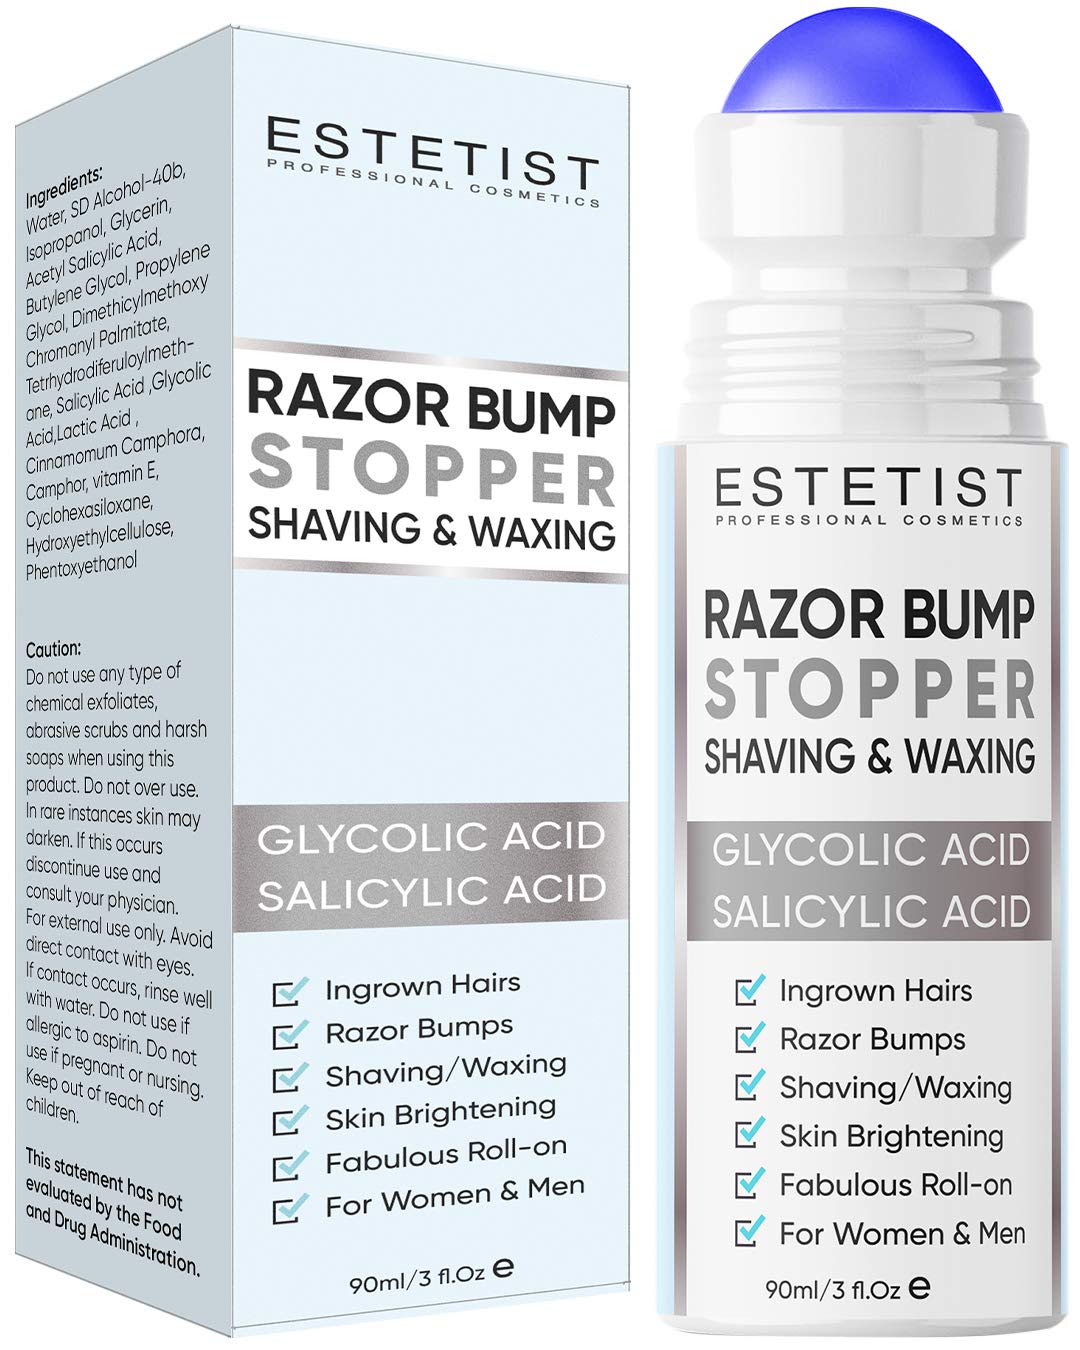 Razor Bump Stopper Solution for Ingrown Hair Skin Care Treatment for Face, Neck, Bikini Area, Legs and Underarm Area After Shave Serum Roll-On for Men and Women With Salicylic Acid, Glycolic Acid